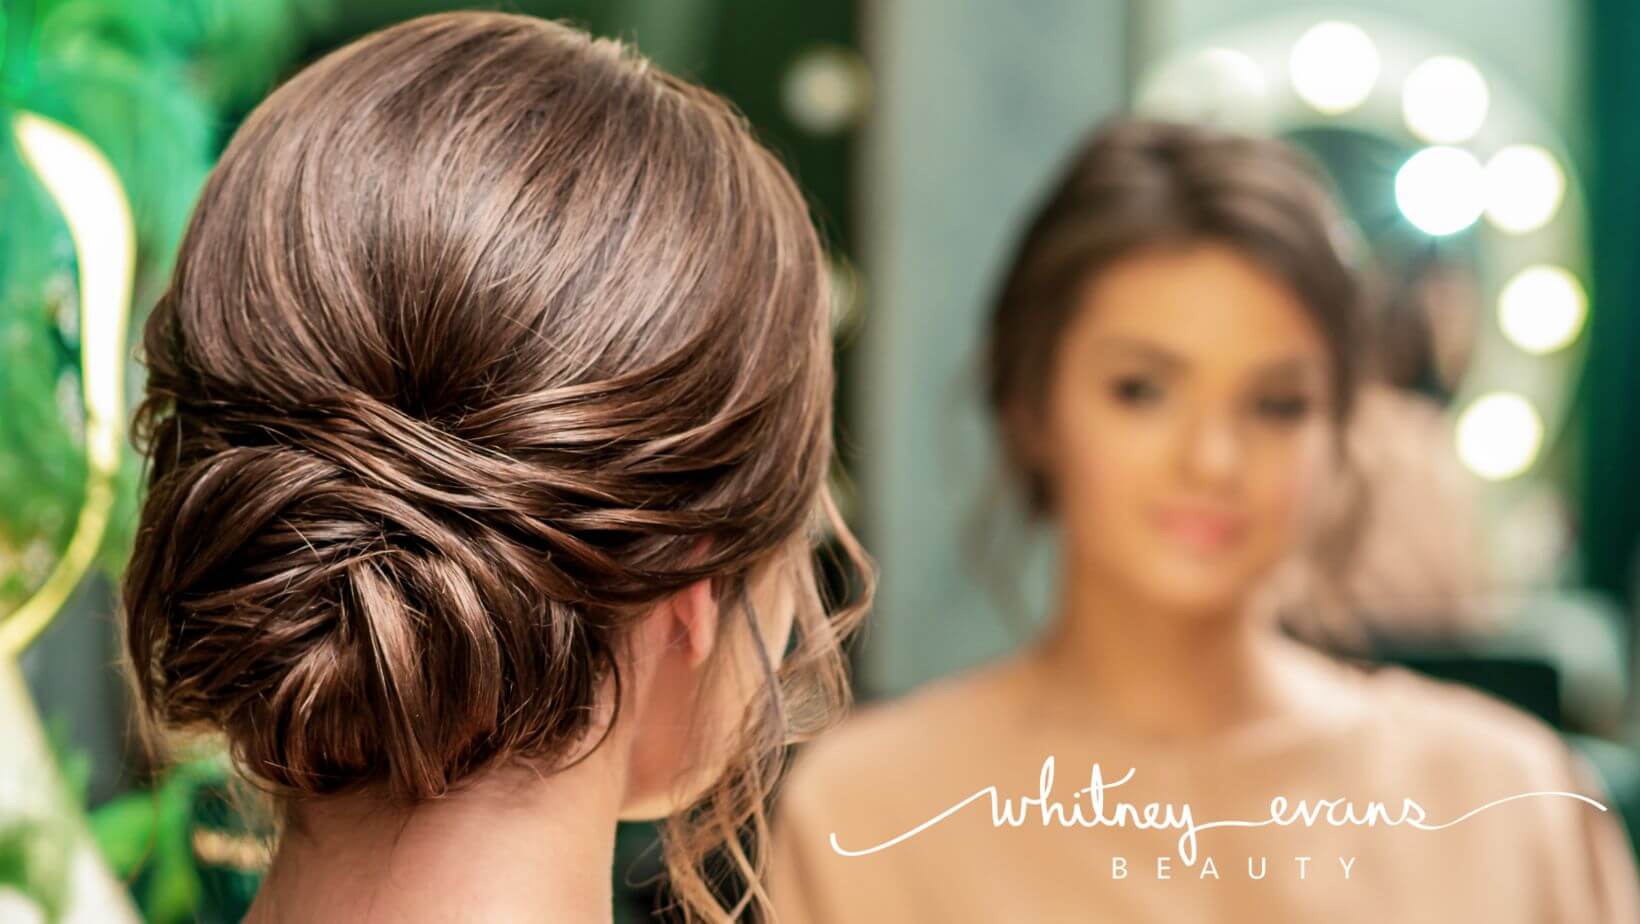 Brunette hair styled in a low bun by Whitney Evans Beauty